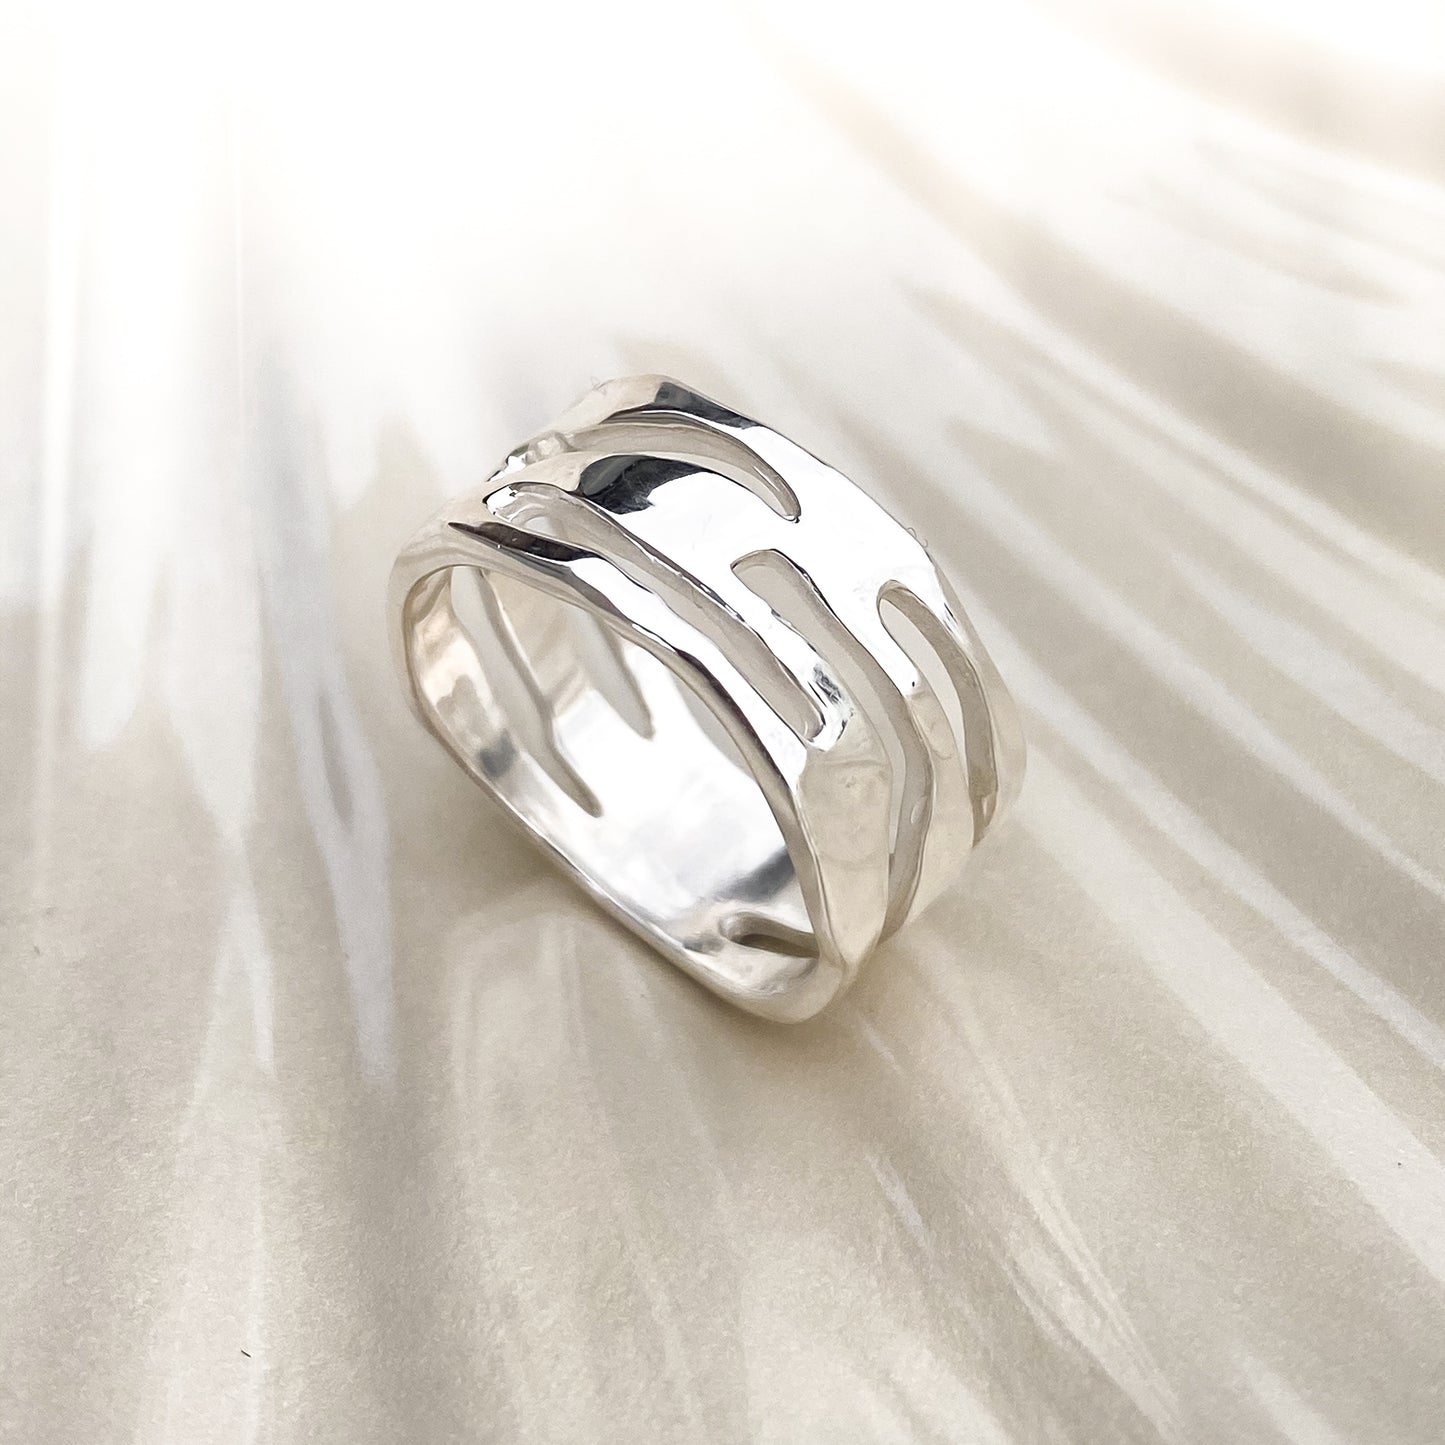 Strata Wide Sterling Silver Ring